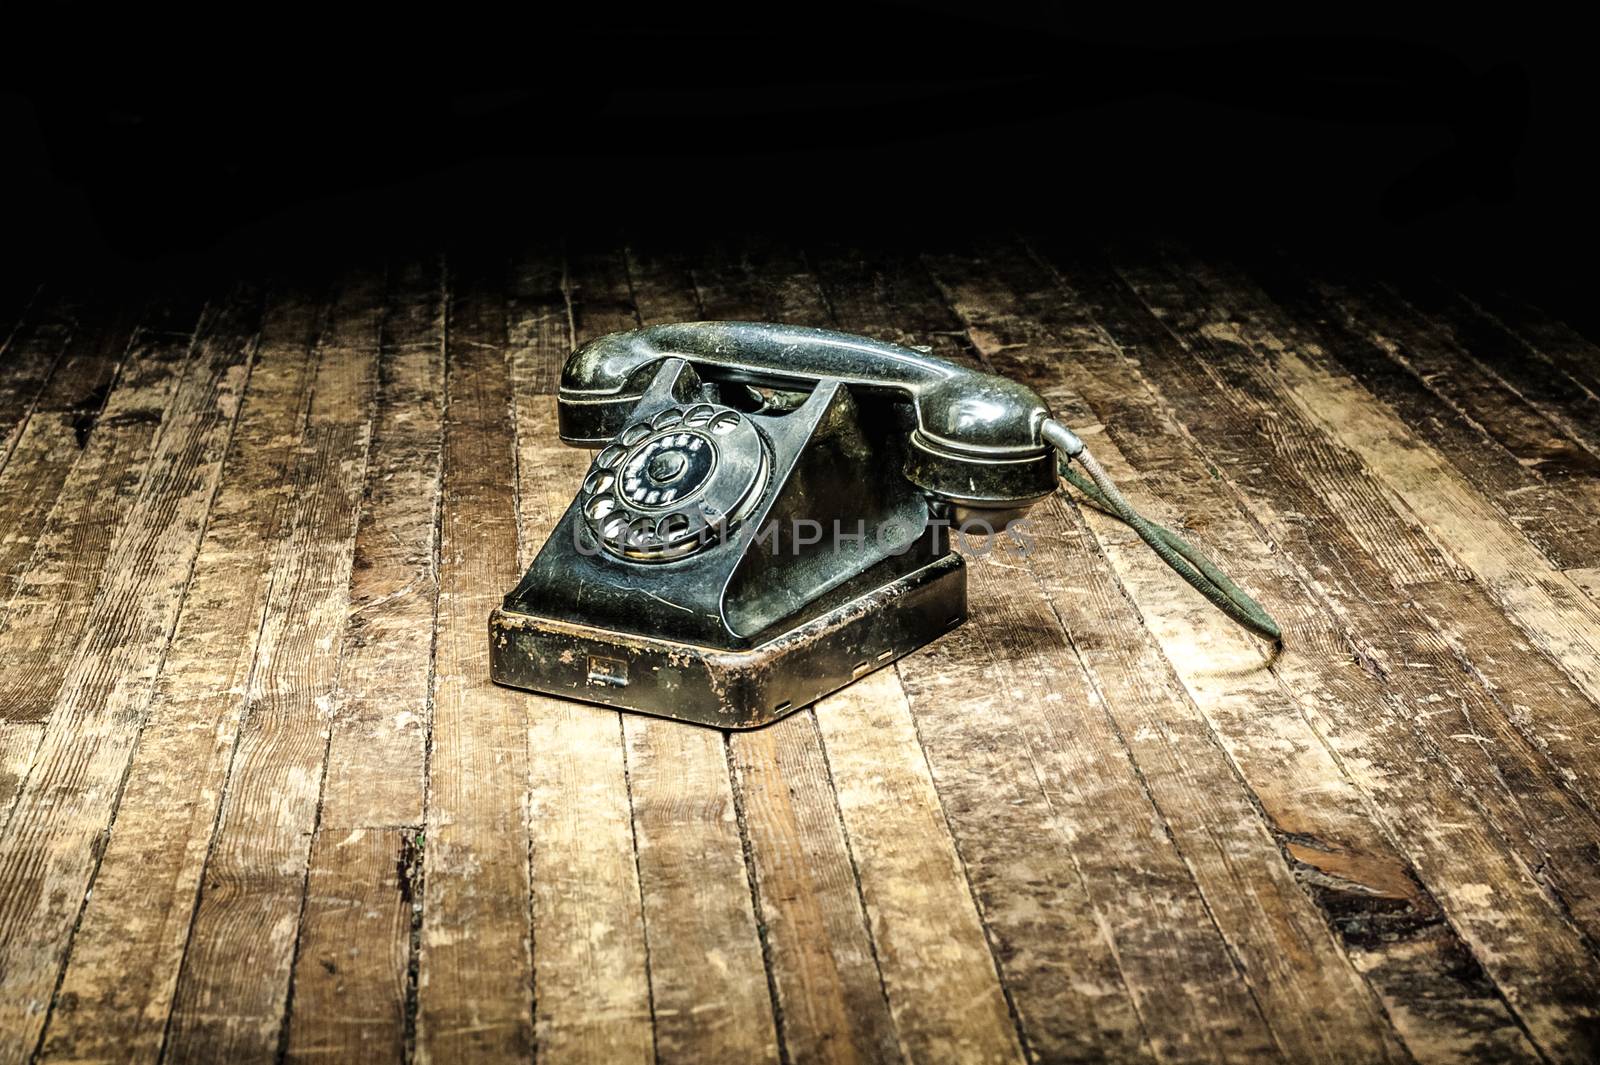 black retro telephone with a rotary dial stands on a wooden floor in the dark